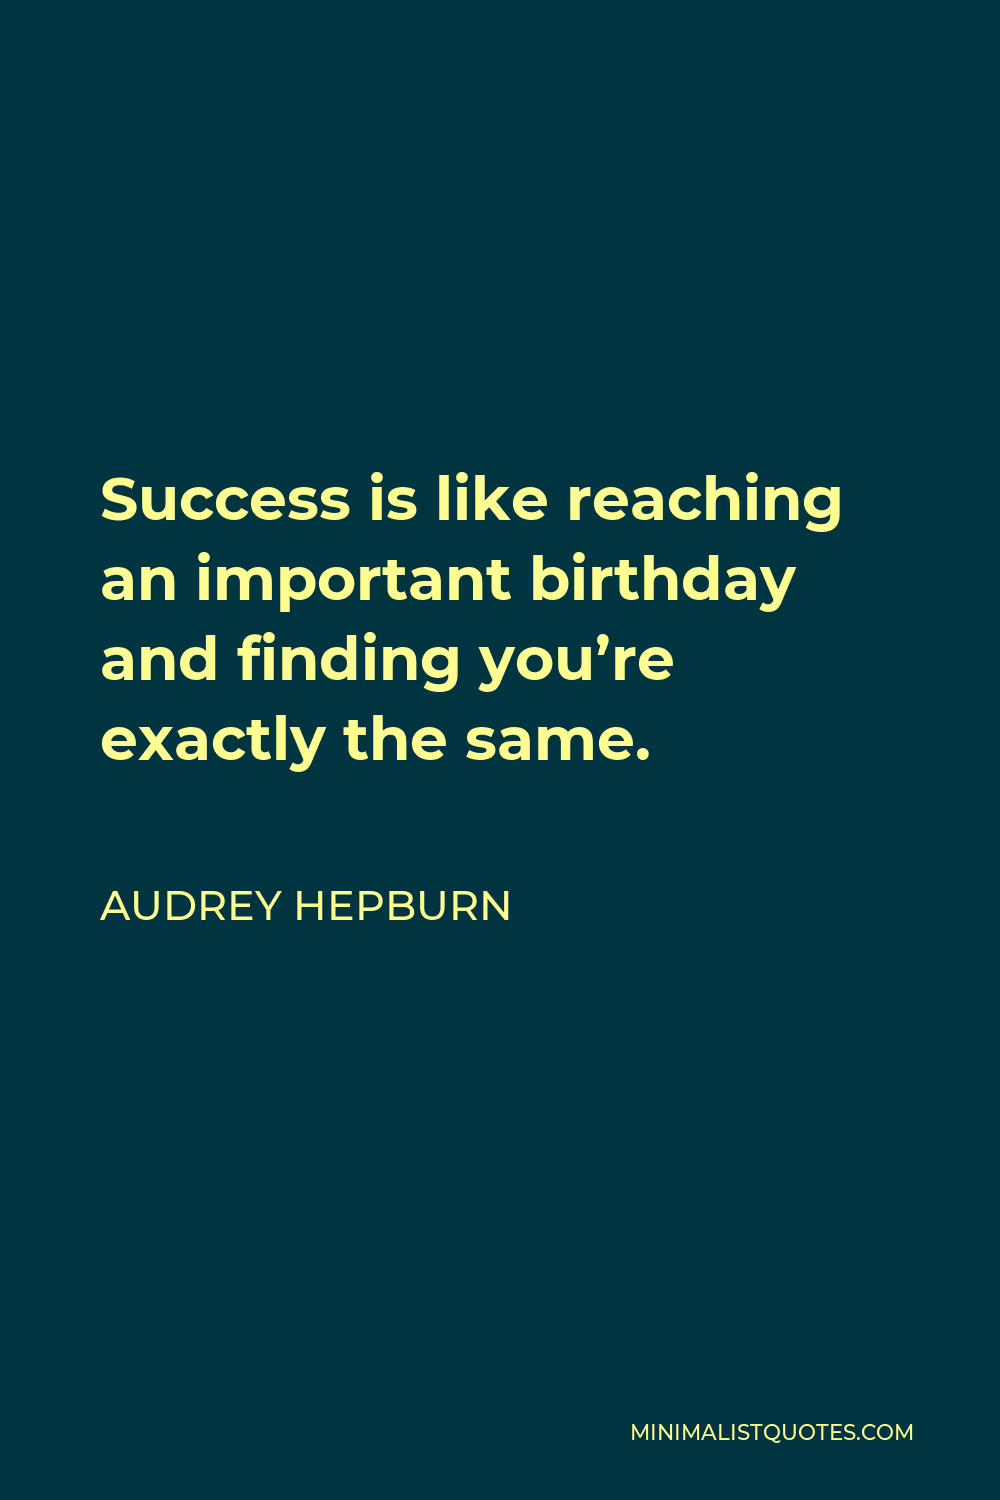 Audrey Hepburn Quote - Success is like reaching an important birthday and finding you’re exactly the same.